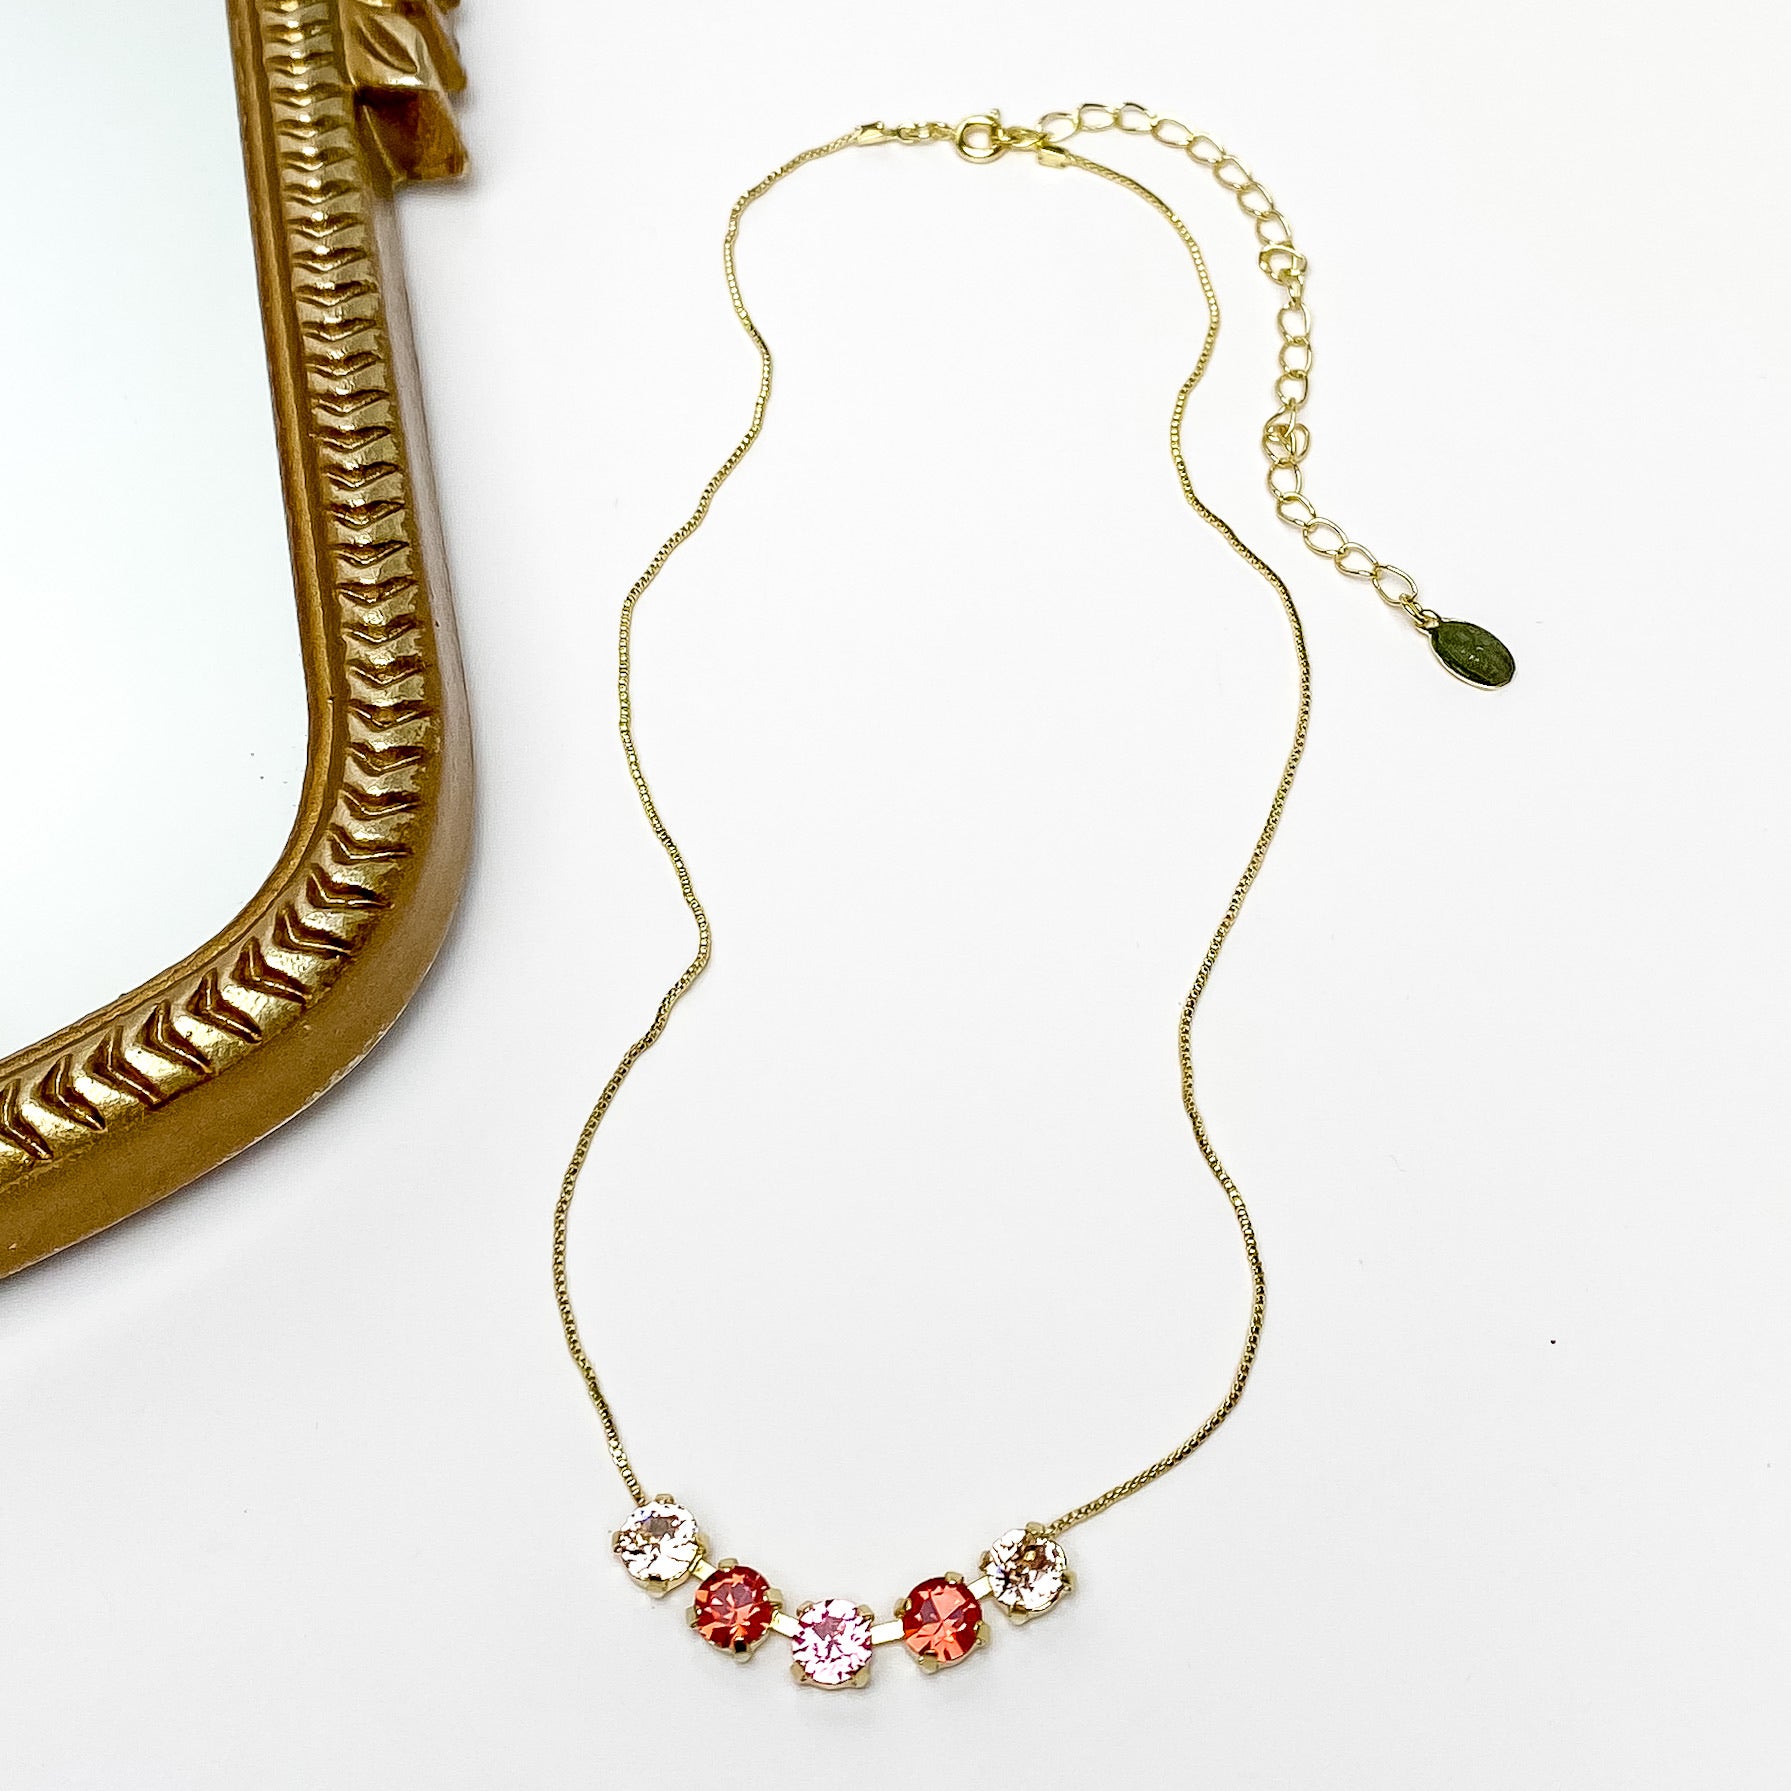 Pictured is a gold necklace with a five crystals. The center crystal is pink, the next one on each side is red, and finally the last two are a light champagne colored crystal. This necklace is pictured on a white background with a gold mirror on the left side.